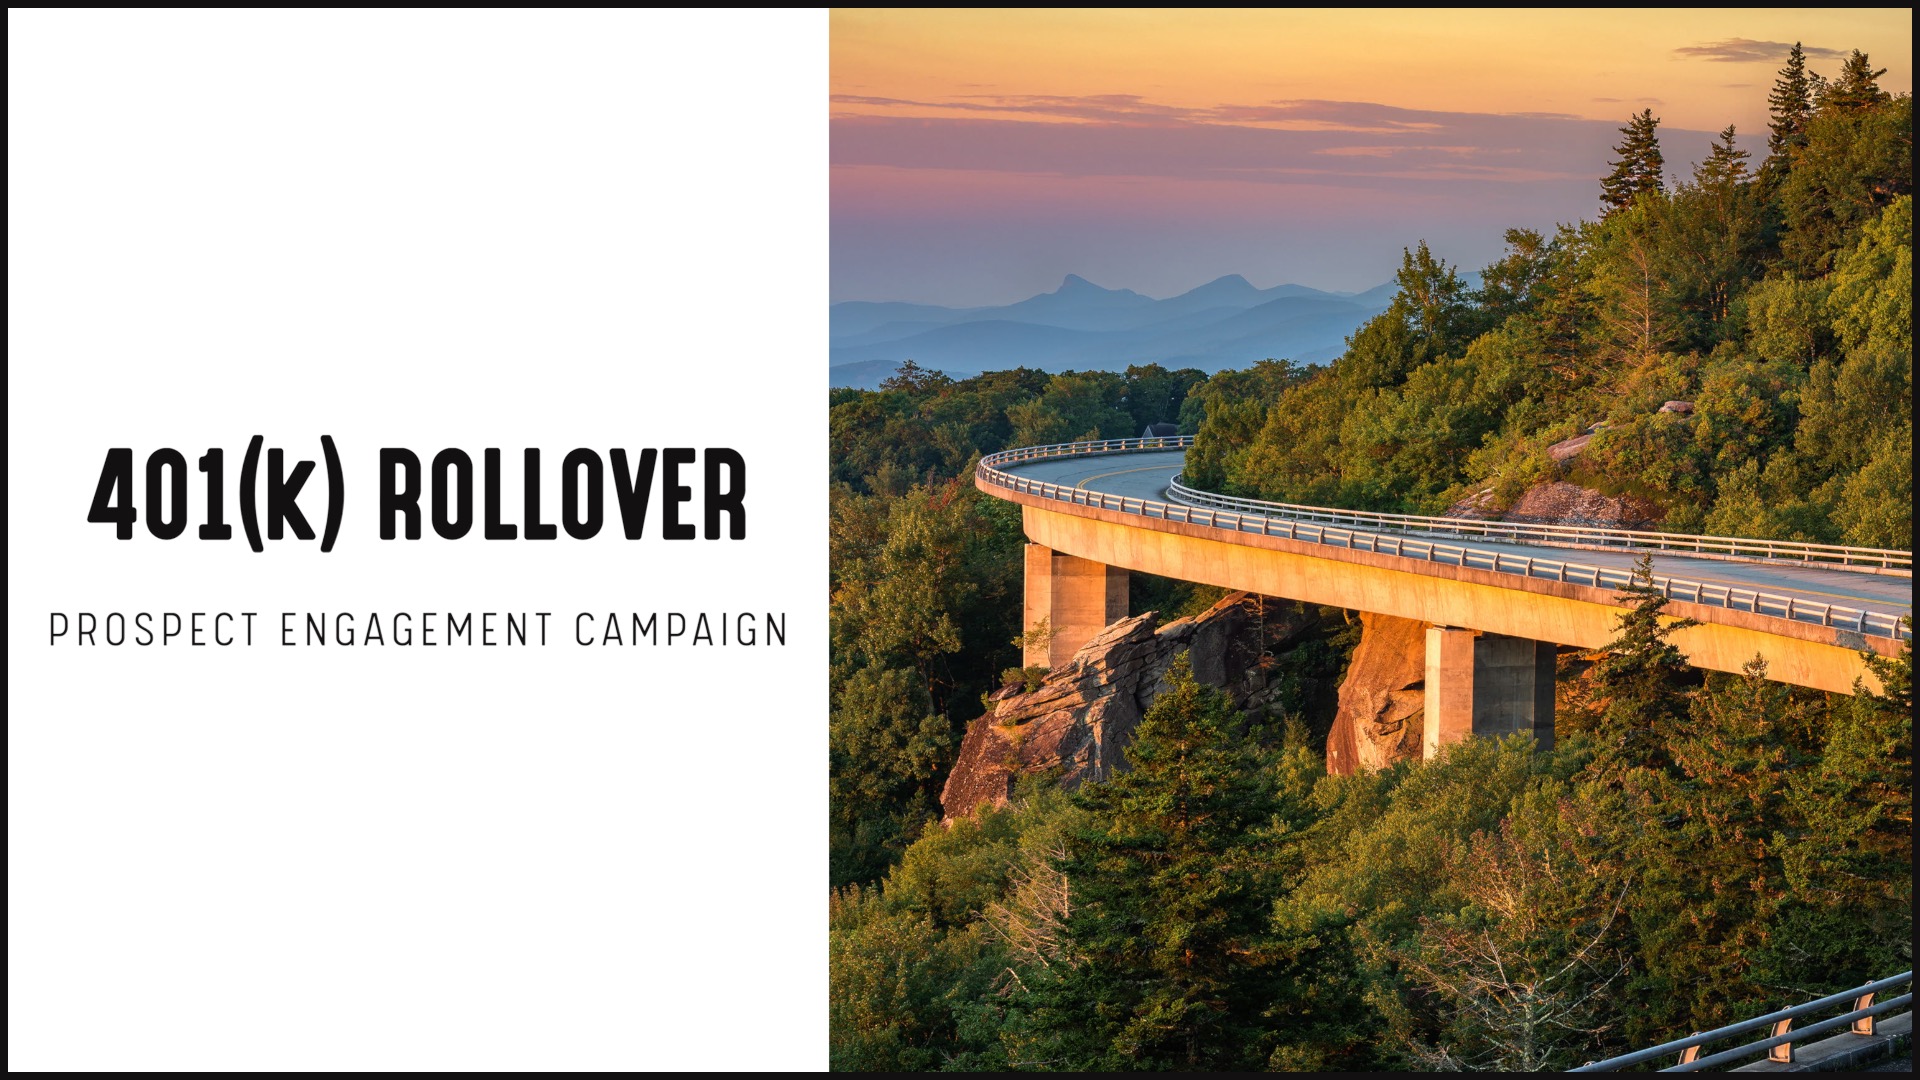 [NEW] Prospect Engagement Campaign | 401(k) Rollover